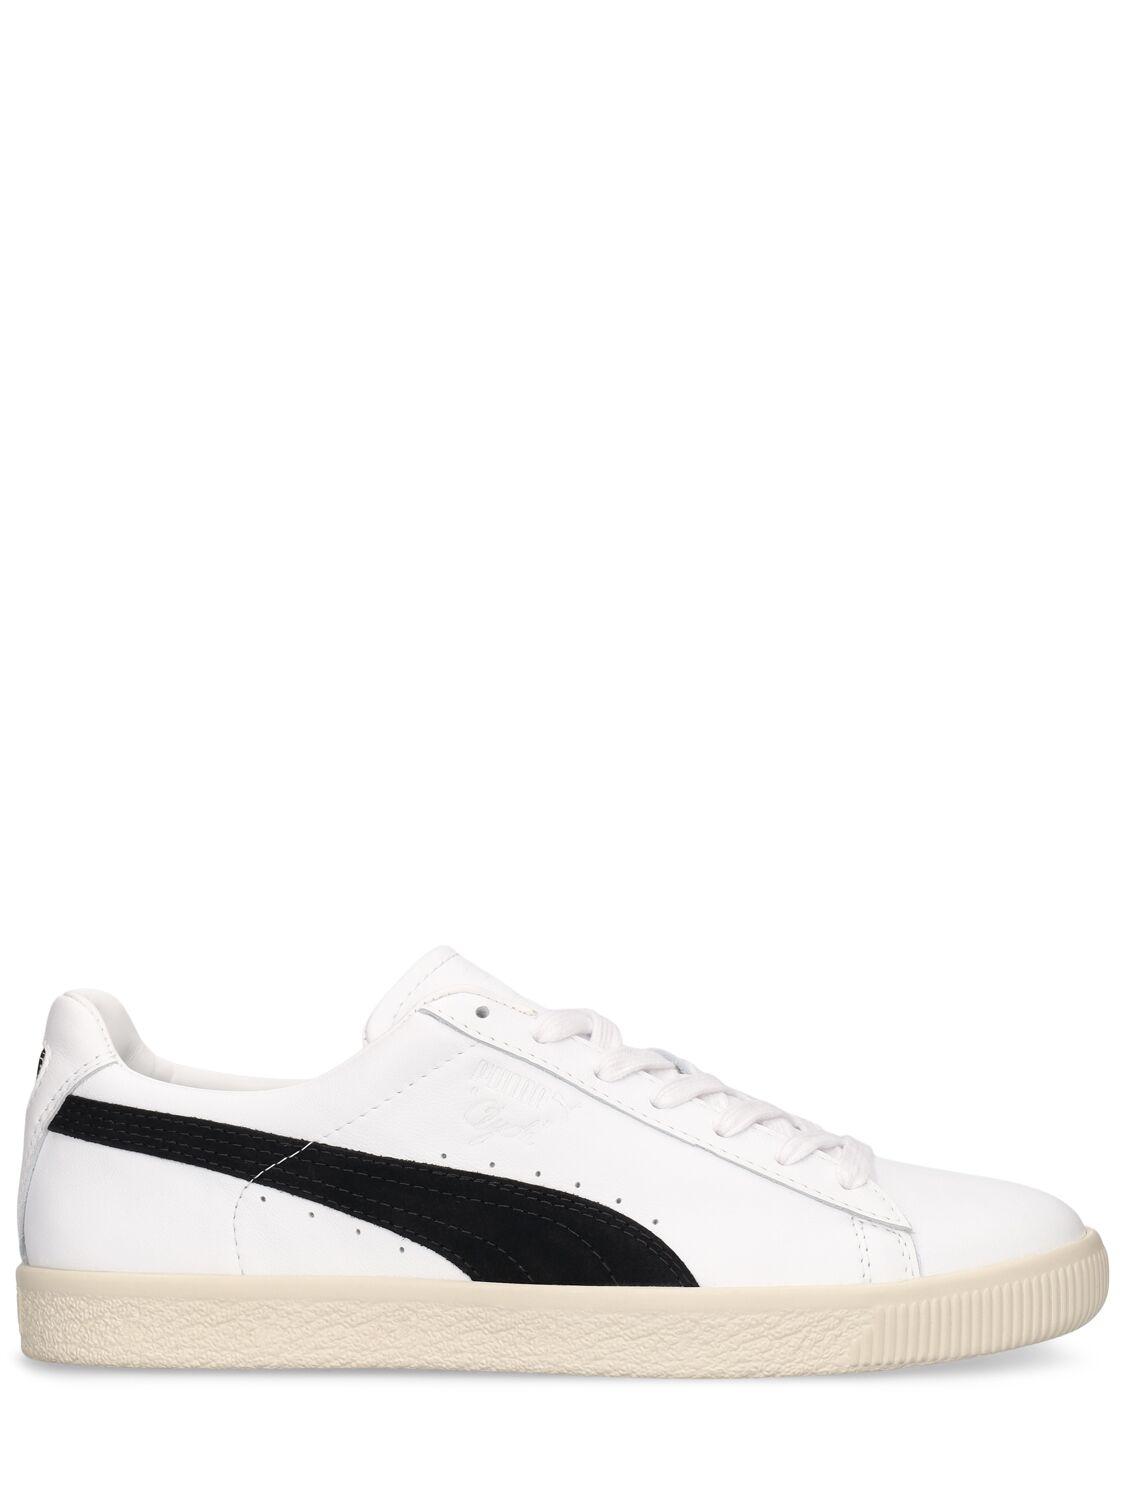 Puma Clyde Made In Germany Sneakers In White